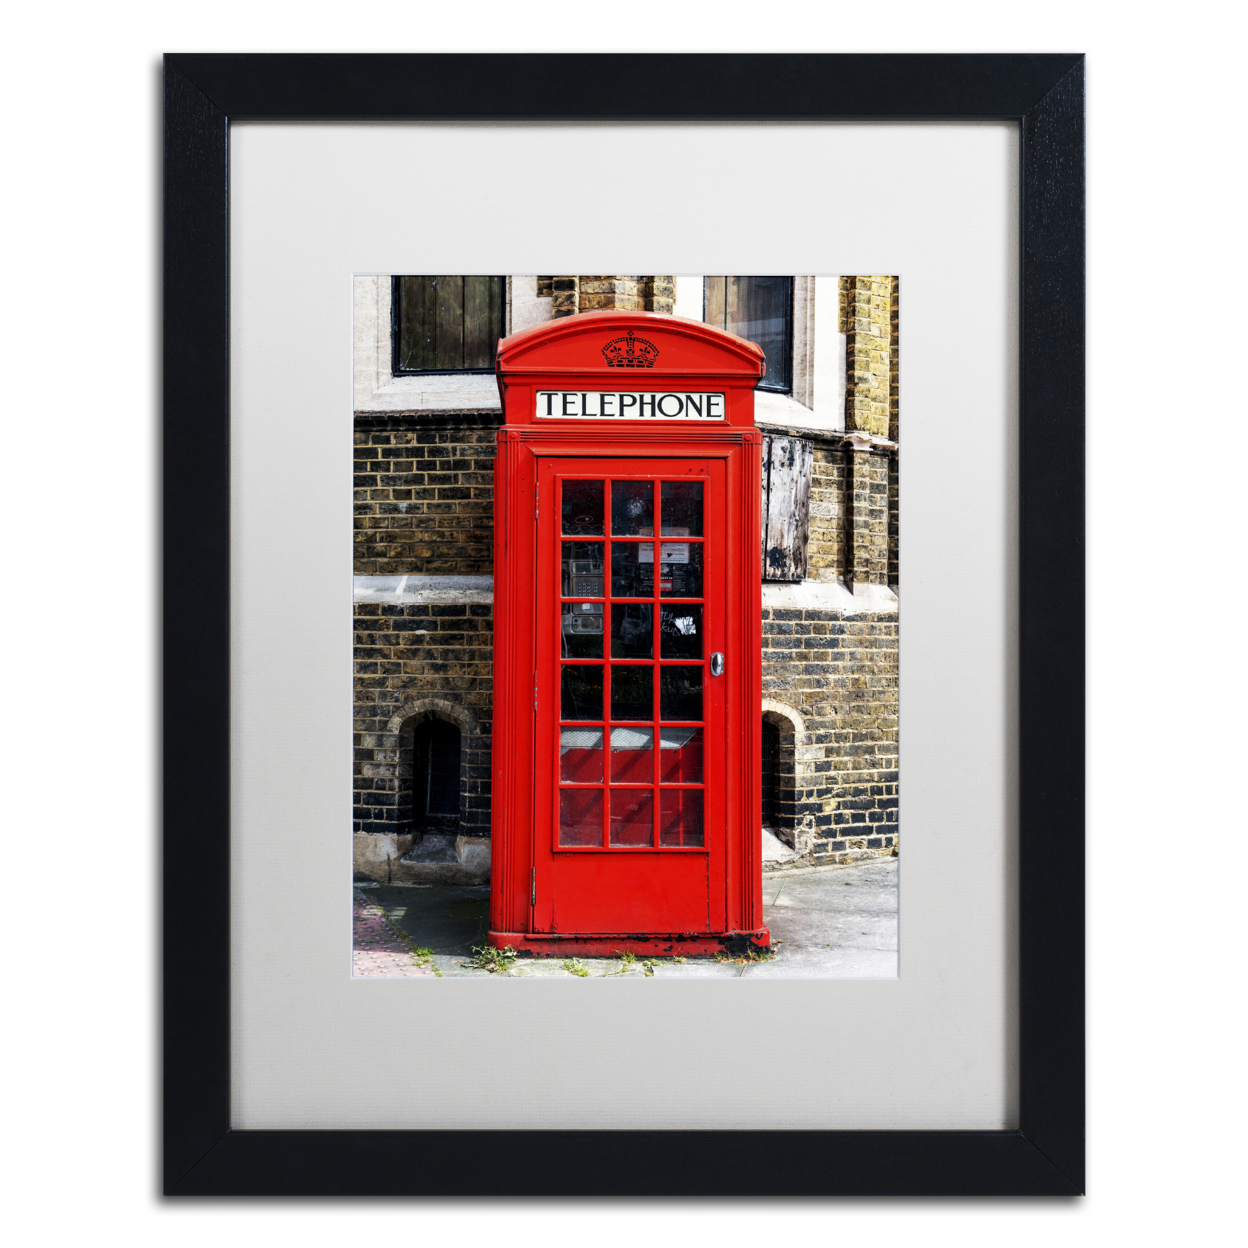 Philippe Hugonnard 'English Phone Booth London' Black Wooden Framed Art 18 X 22 Inches